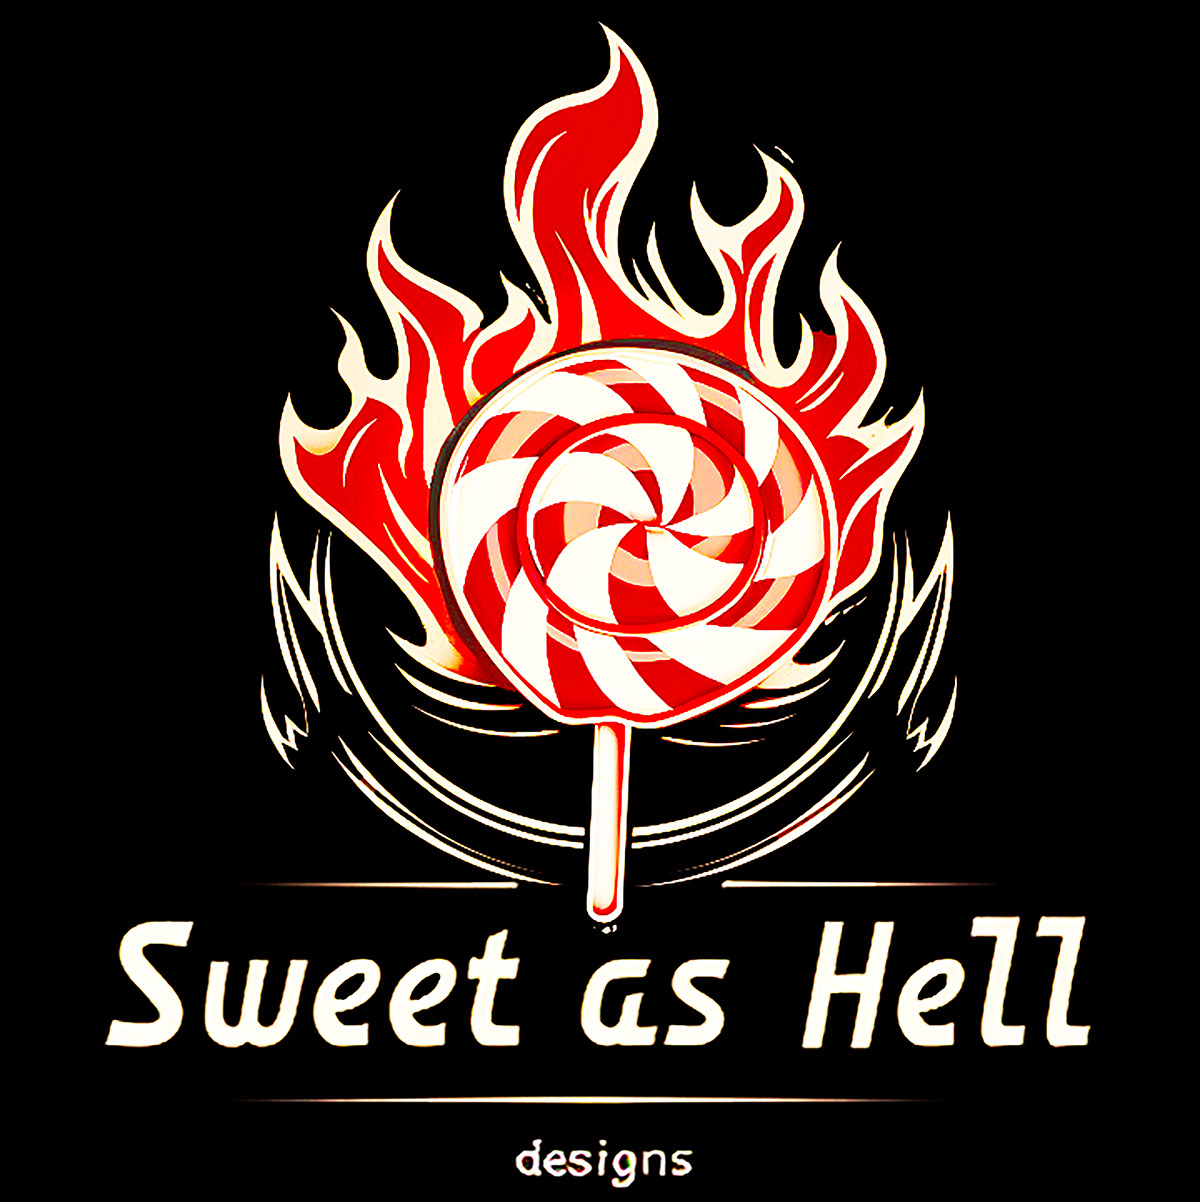 Sweet_As_Hell_Designs_Licensable_Ruffian_no_17 rendition image